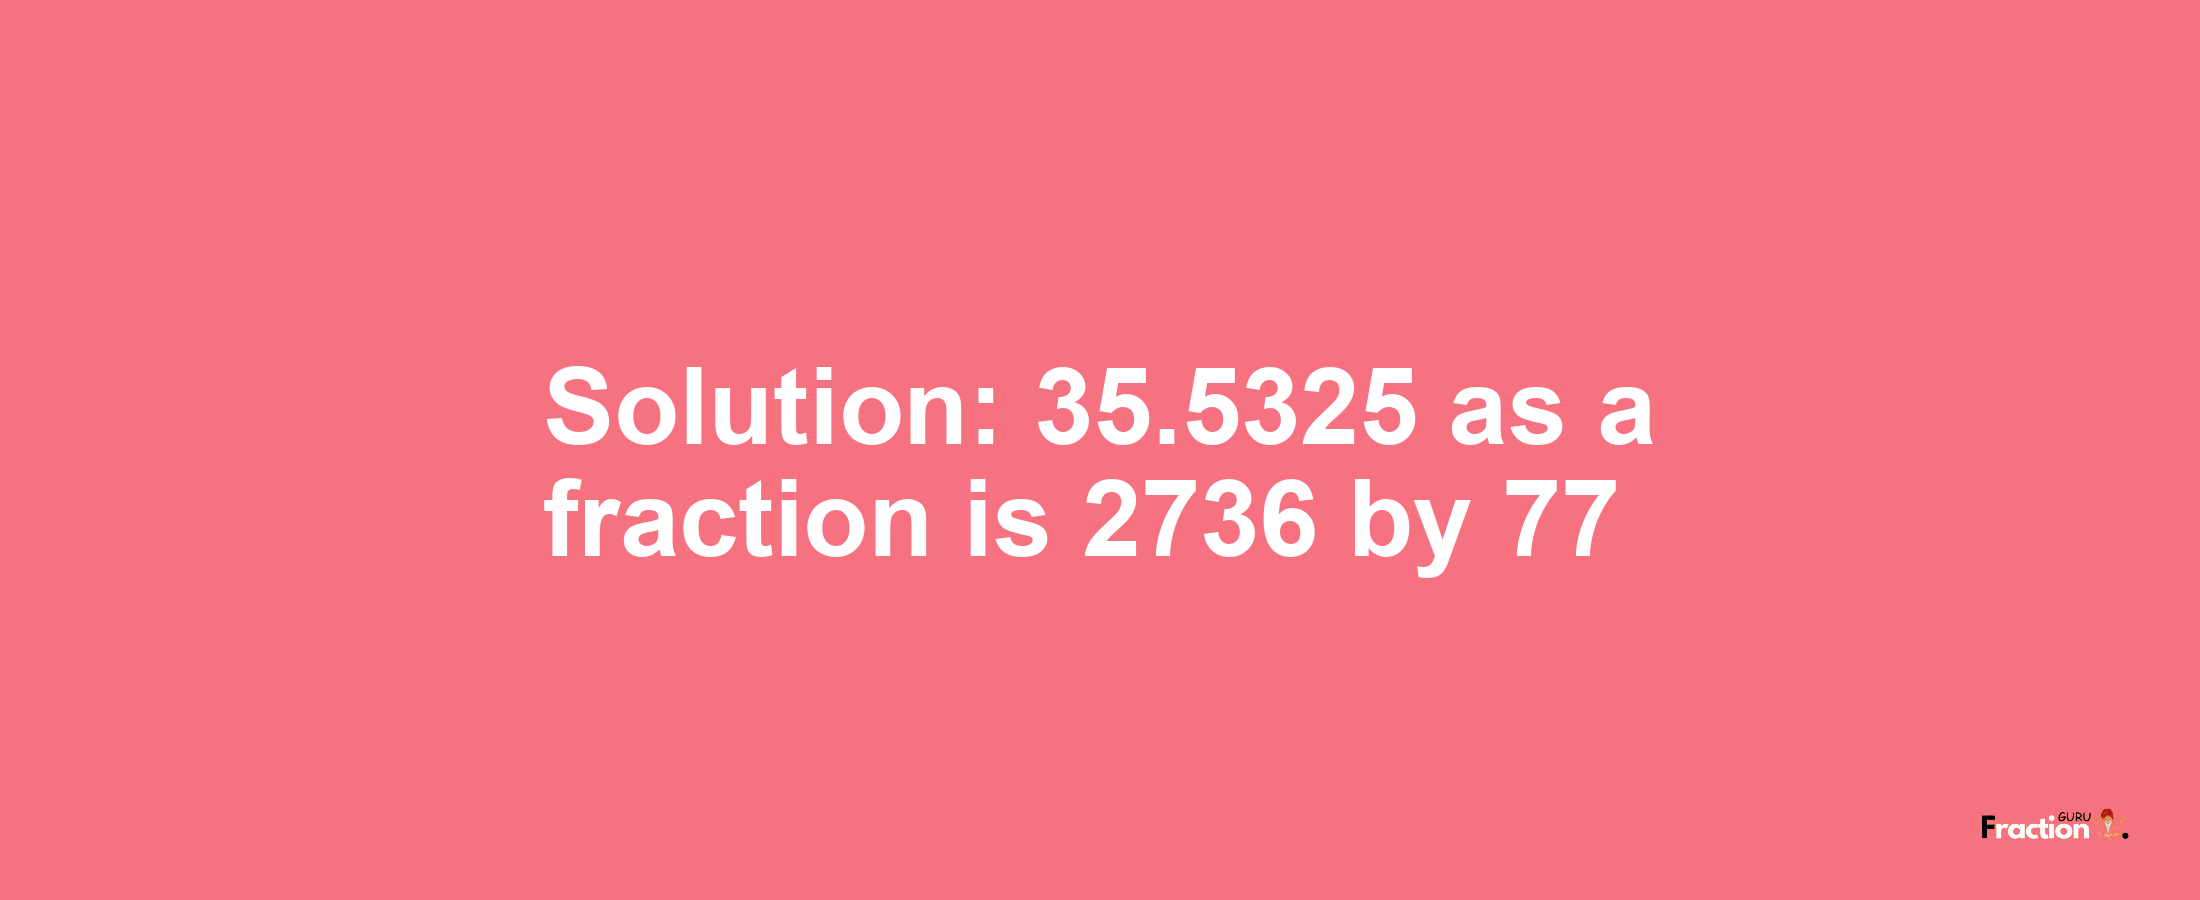 Solution:35.5325 as a fraction is 2736/77